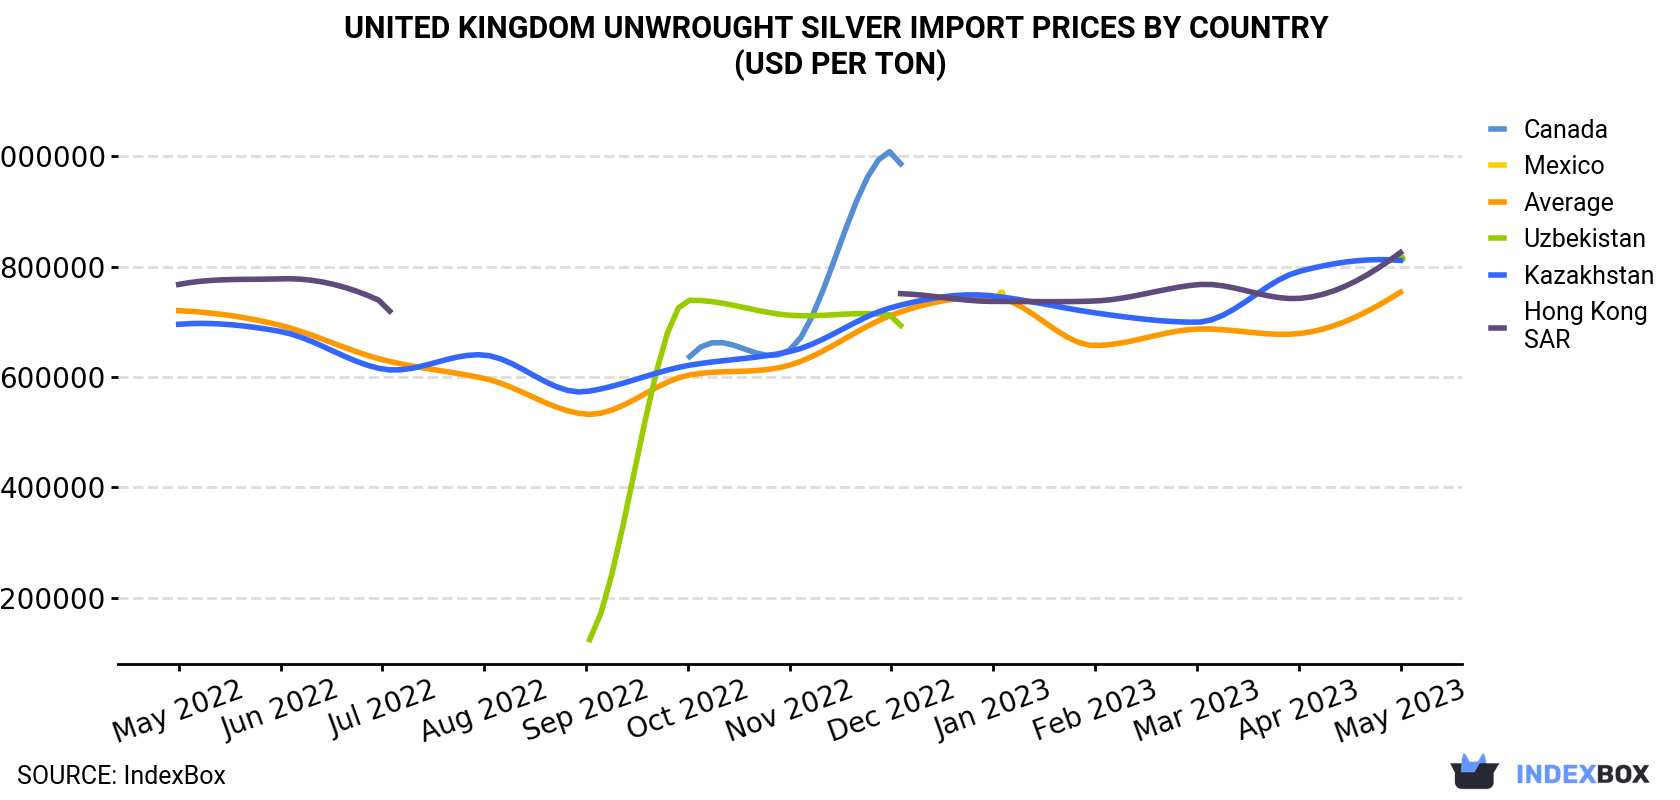 United Kingdom Unwrought Silver Import Prices By Country (USD Per Ton)